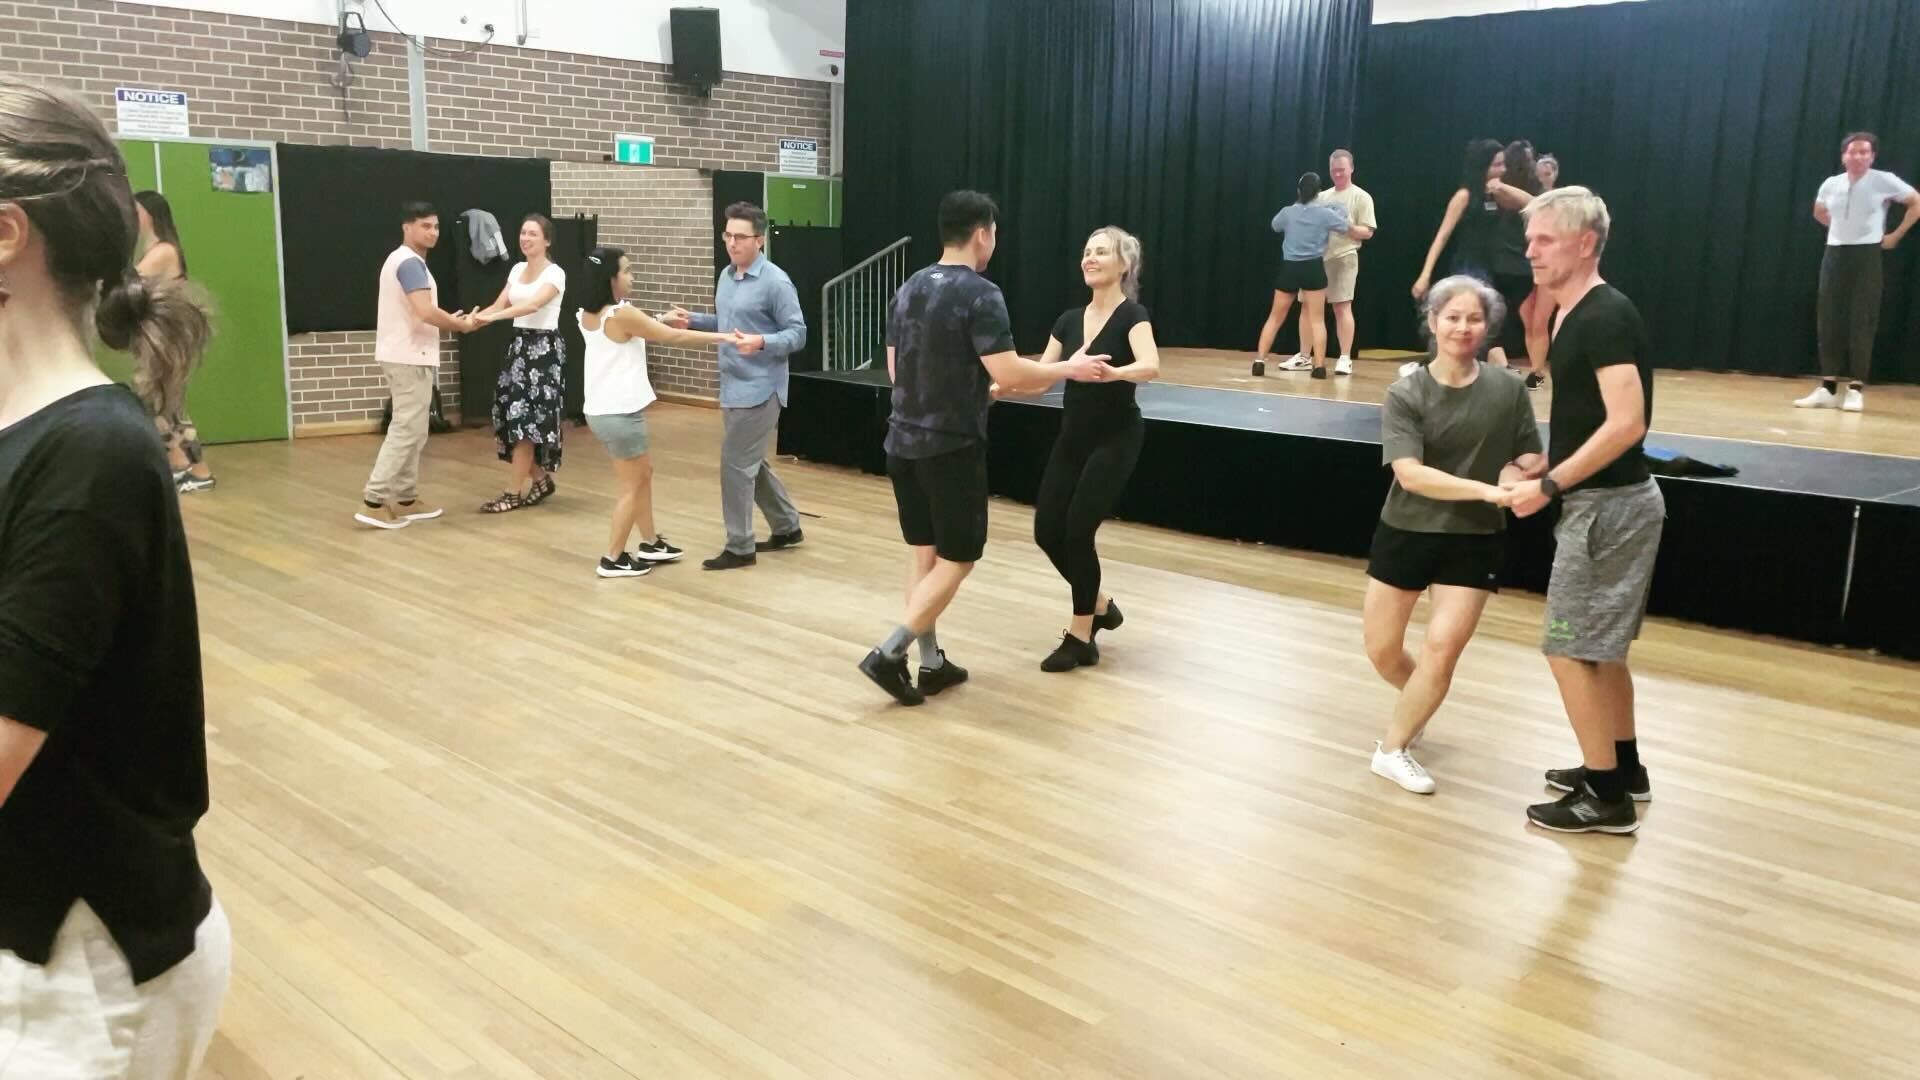 Great vibes on our Tuesdays Salsa &amp; Bachata classes 03/10.
Come and join us!! Mondays, Tuesdays and Thursdays.
.
#salsadance #bachata #salsadancing #latindance #dance #danceclasses #bondi #bondibeach #joinus #followus #reggaeton #mambo